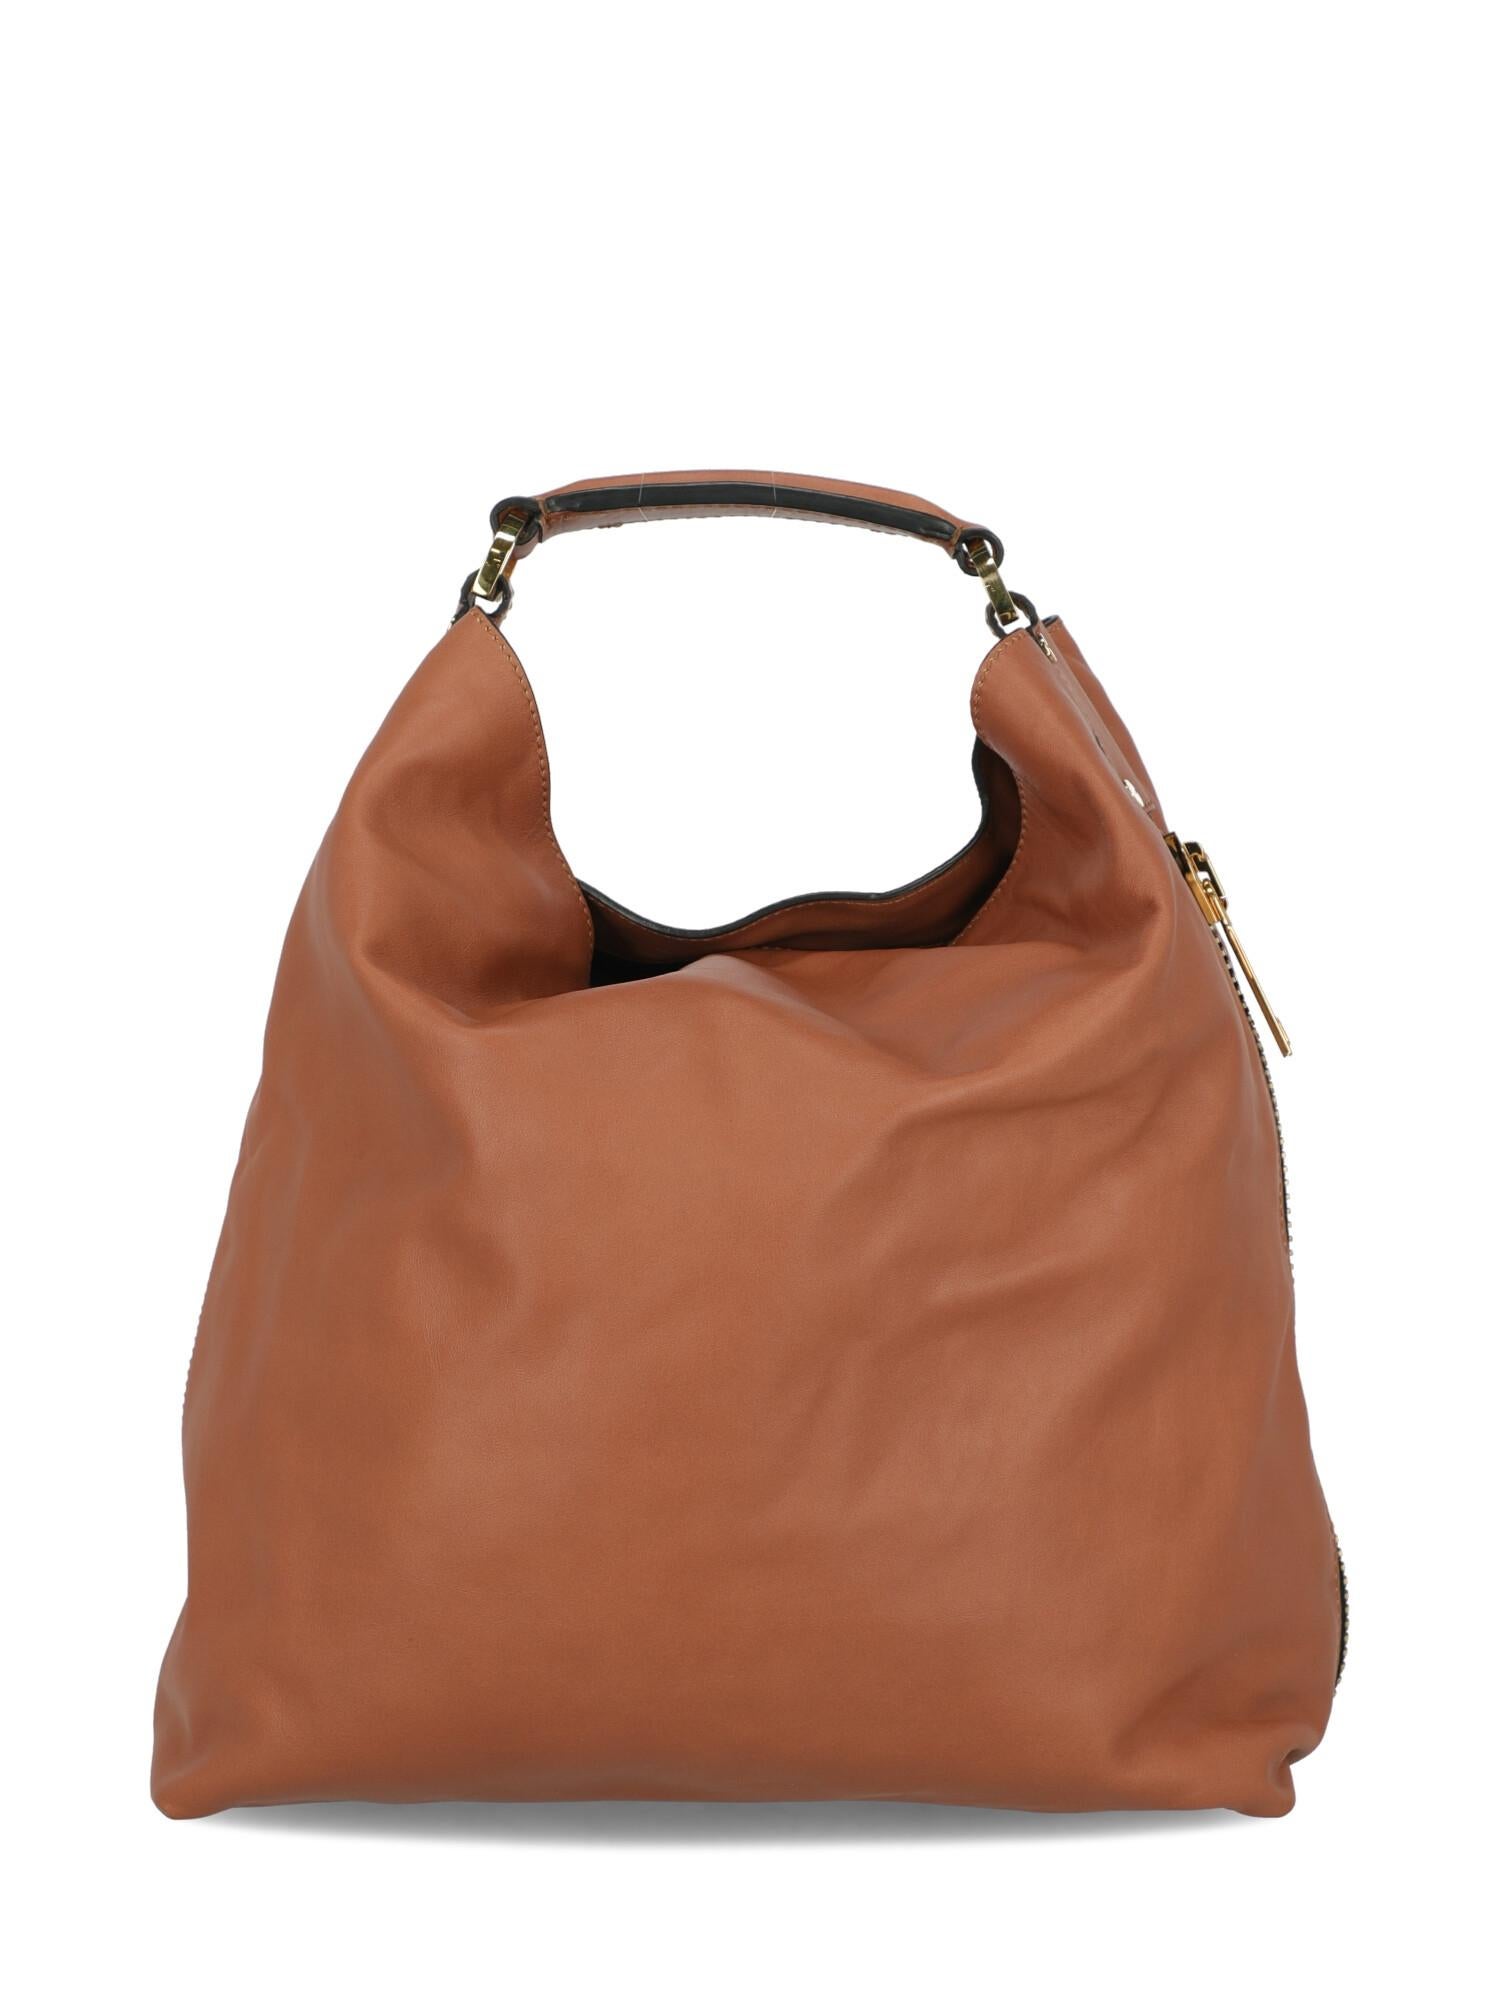 Gianfranco Ferre Woman Handbag Brown Leather In Fair Condition For Sale In Milan, IT